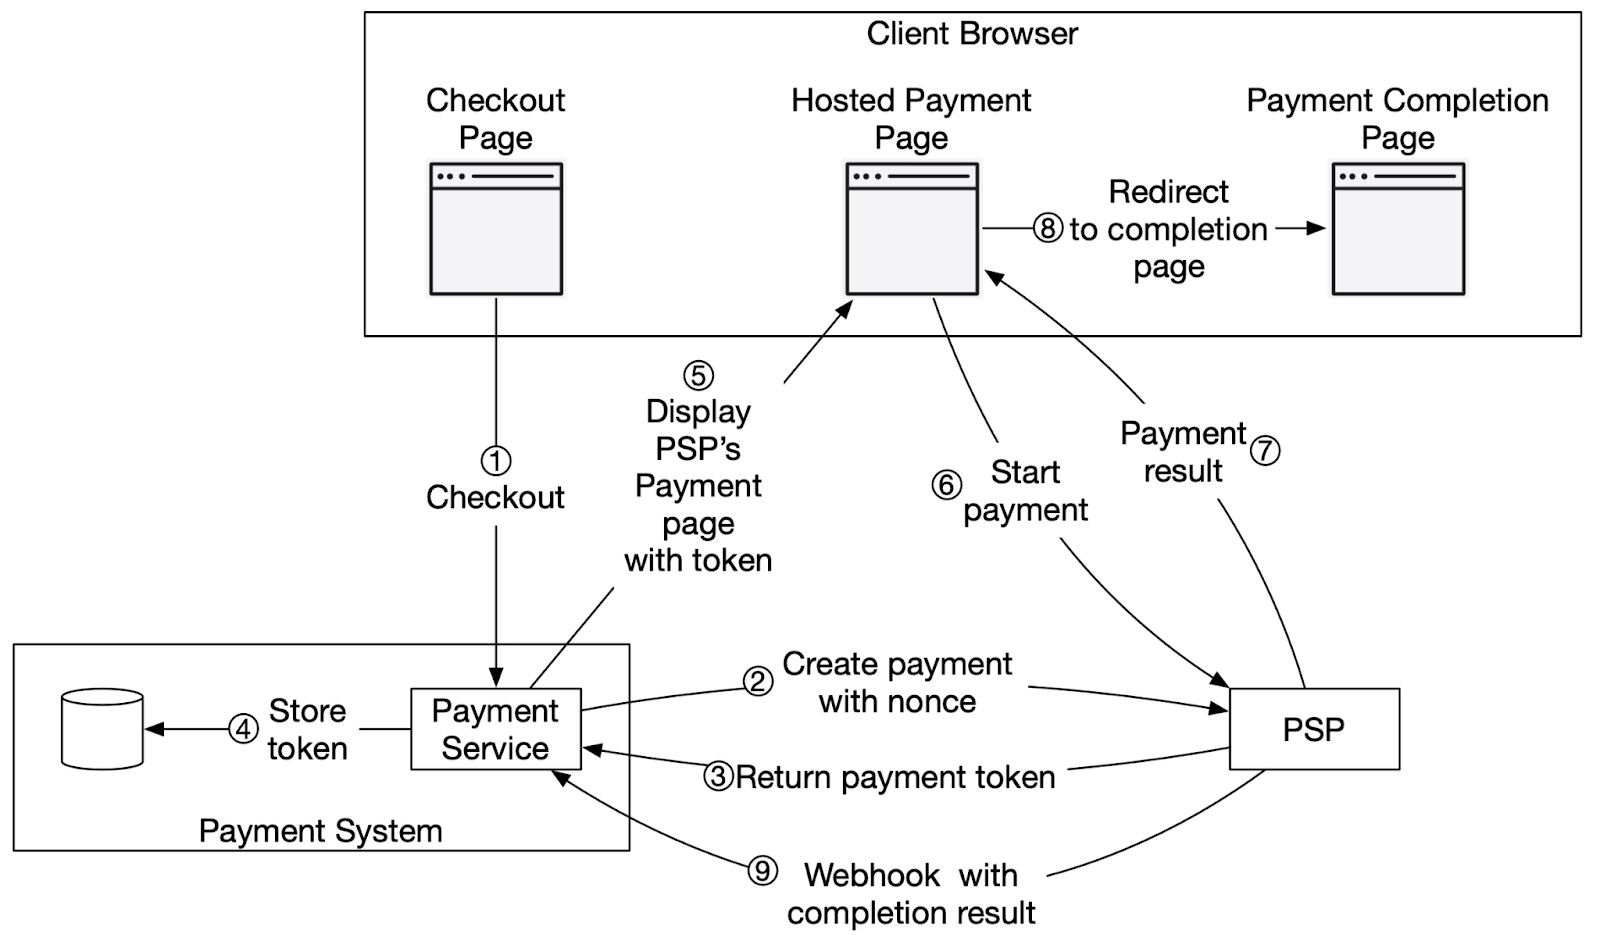 designing-a-payment-system-by-gergely-orosz